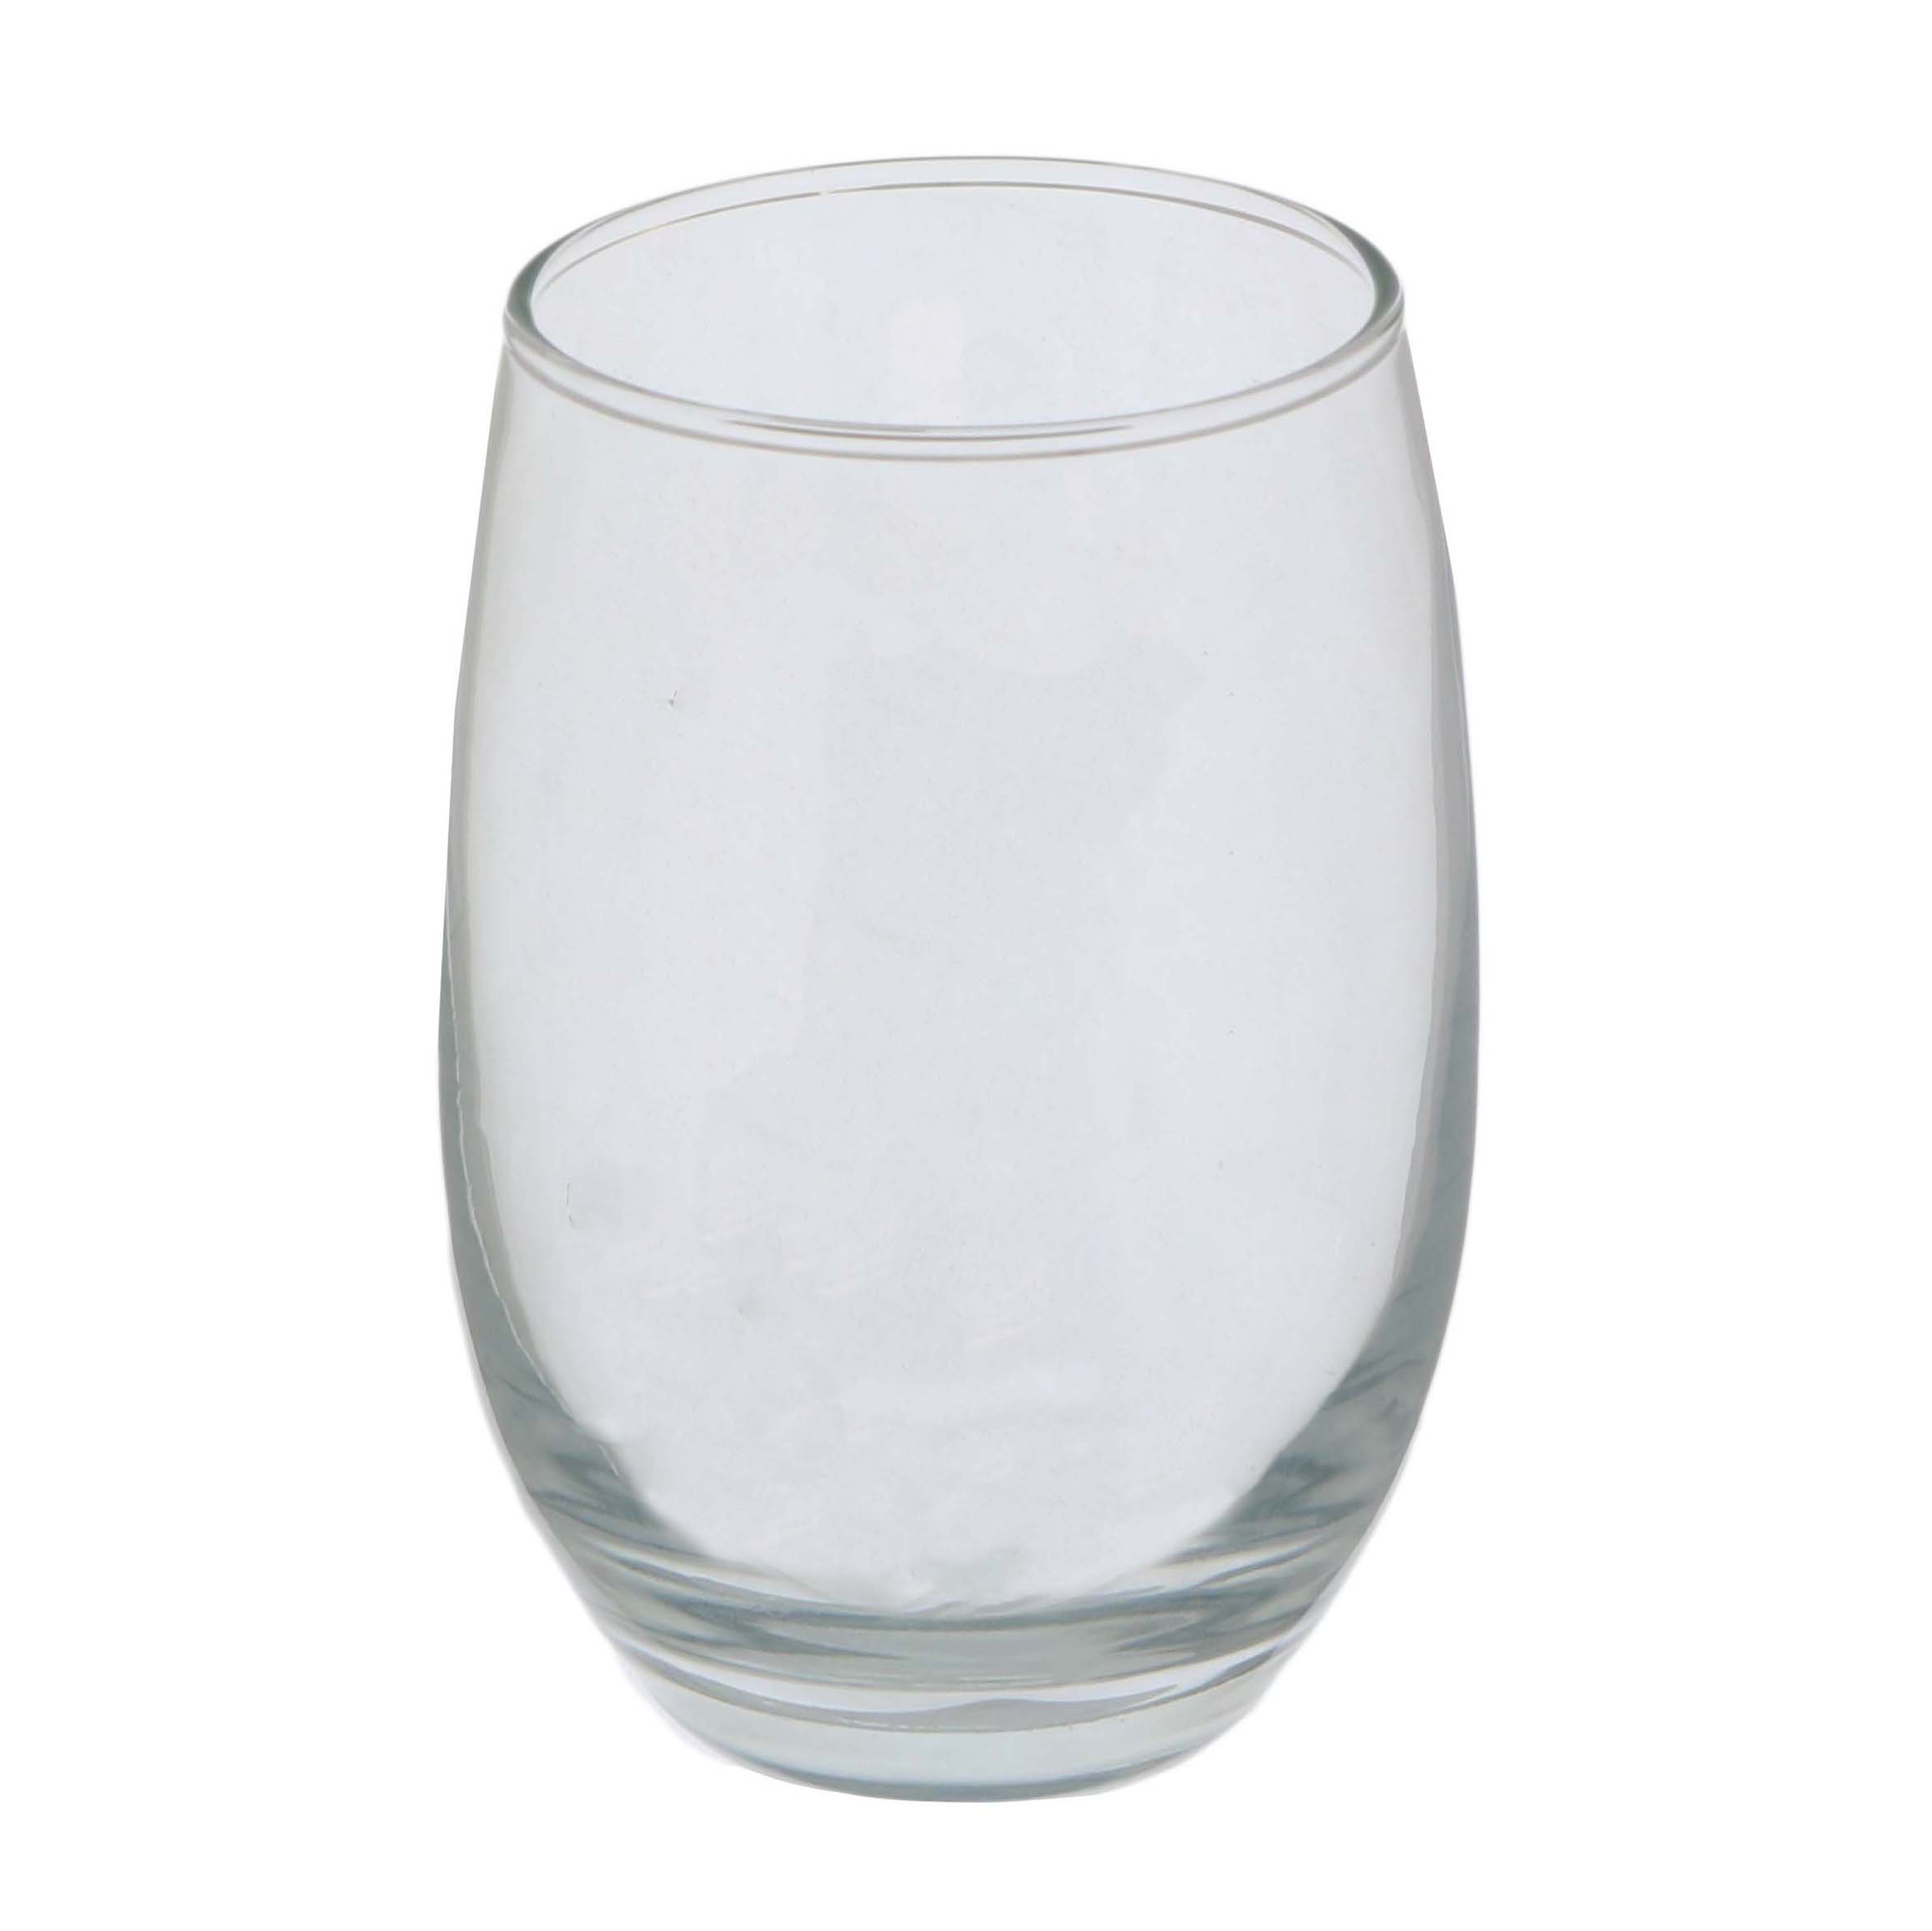 Cristar Stemless Wine Glasses Set of 4, 15.5 Ounce